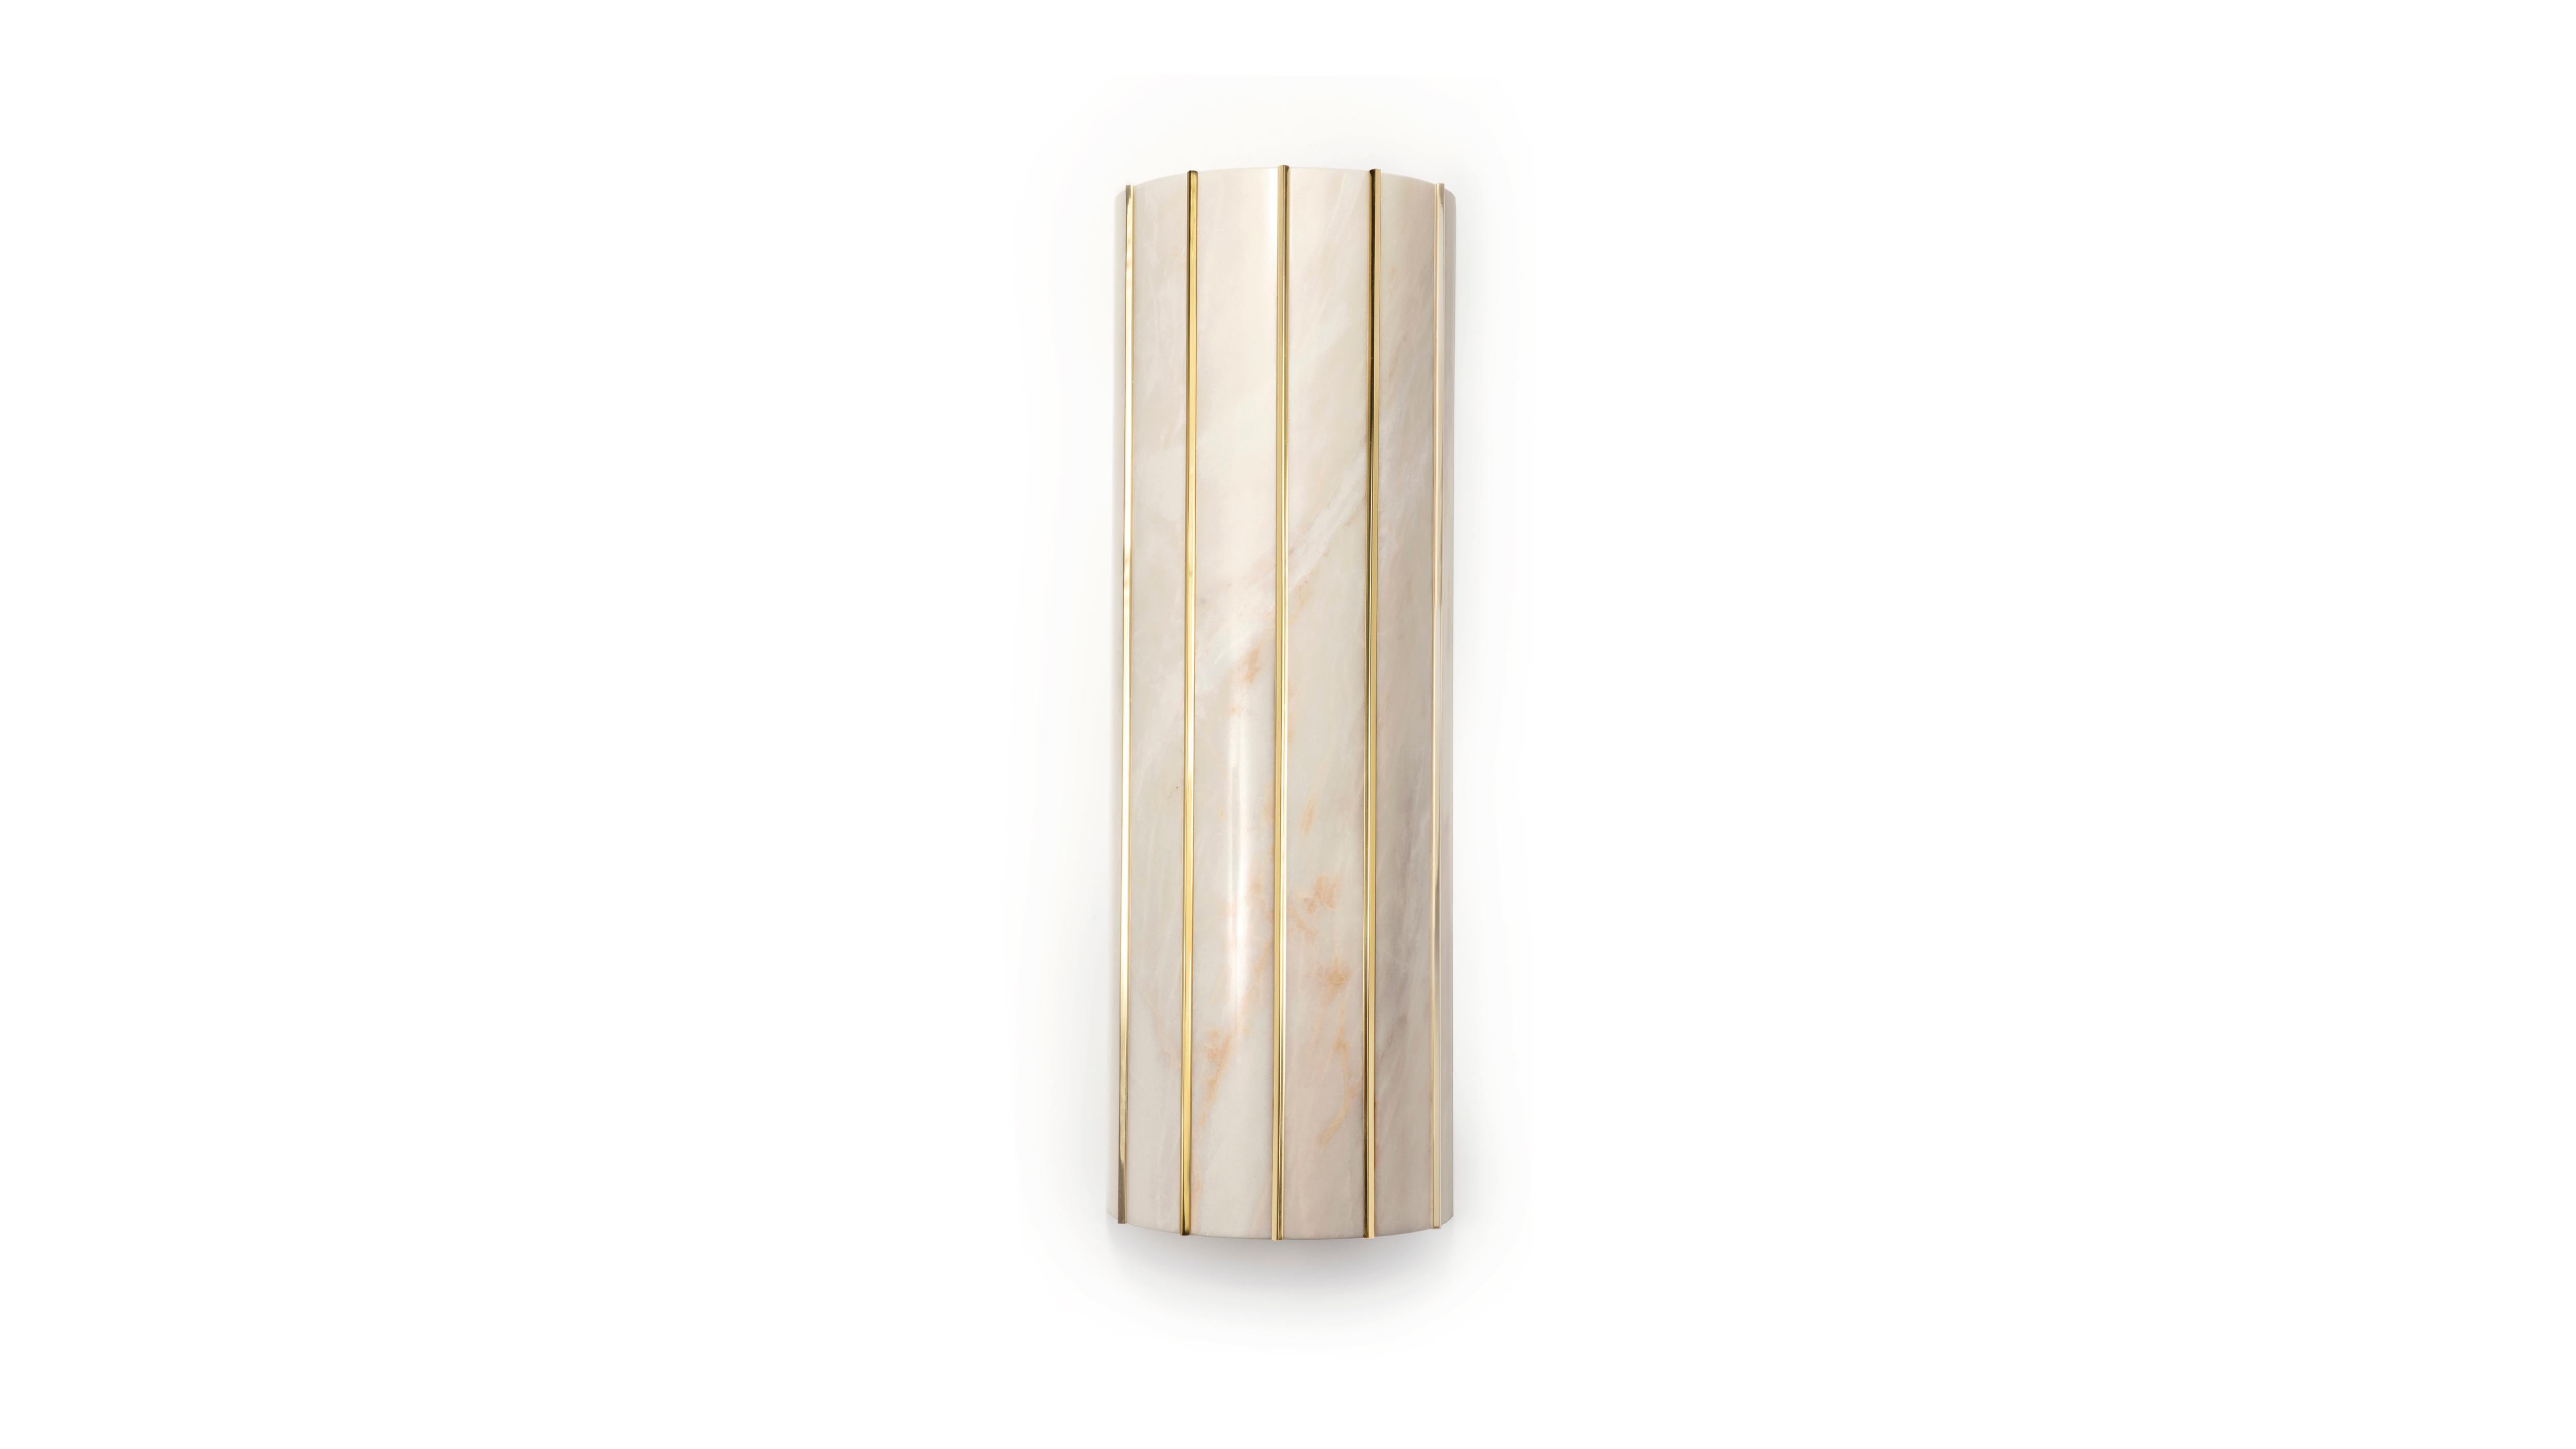 Seagram Estremoz Marble Wall Lamp by InsidherLand
Dimensions: D 8.5 x W 17 x H 50 cm.
Materials: Estremoz marble, polished brass.
4 kg.
Available in other marbles and metals.

The Seagram table lamp receives the name of the first attempt at